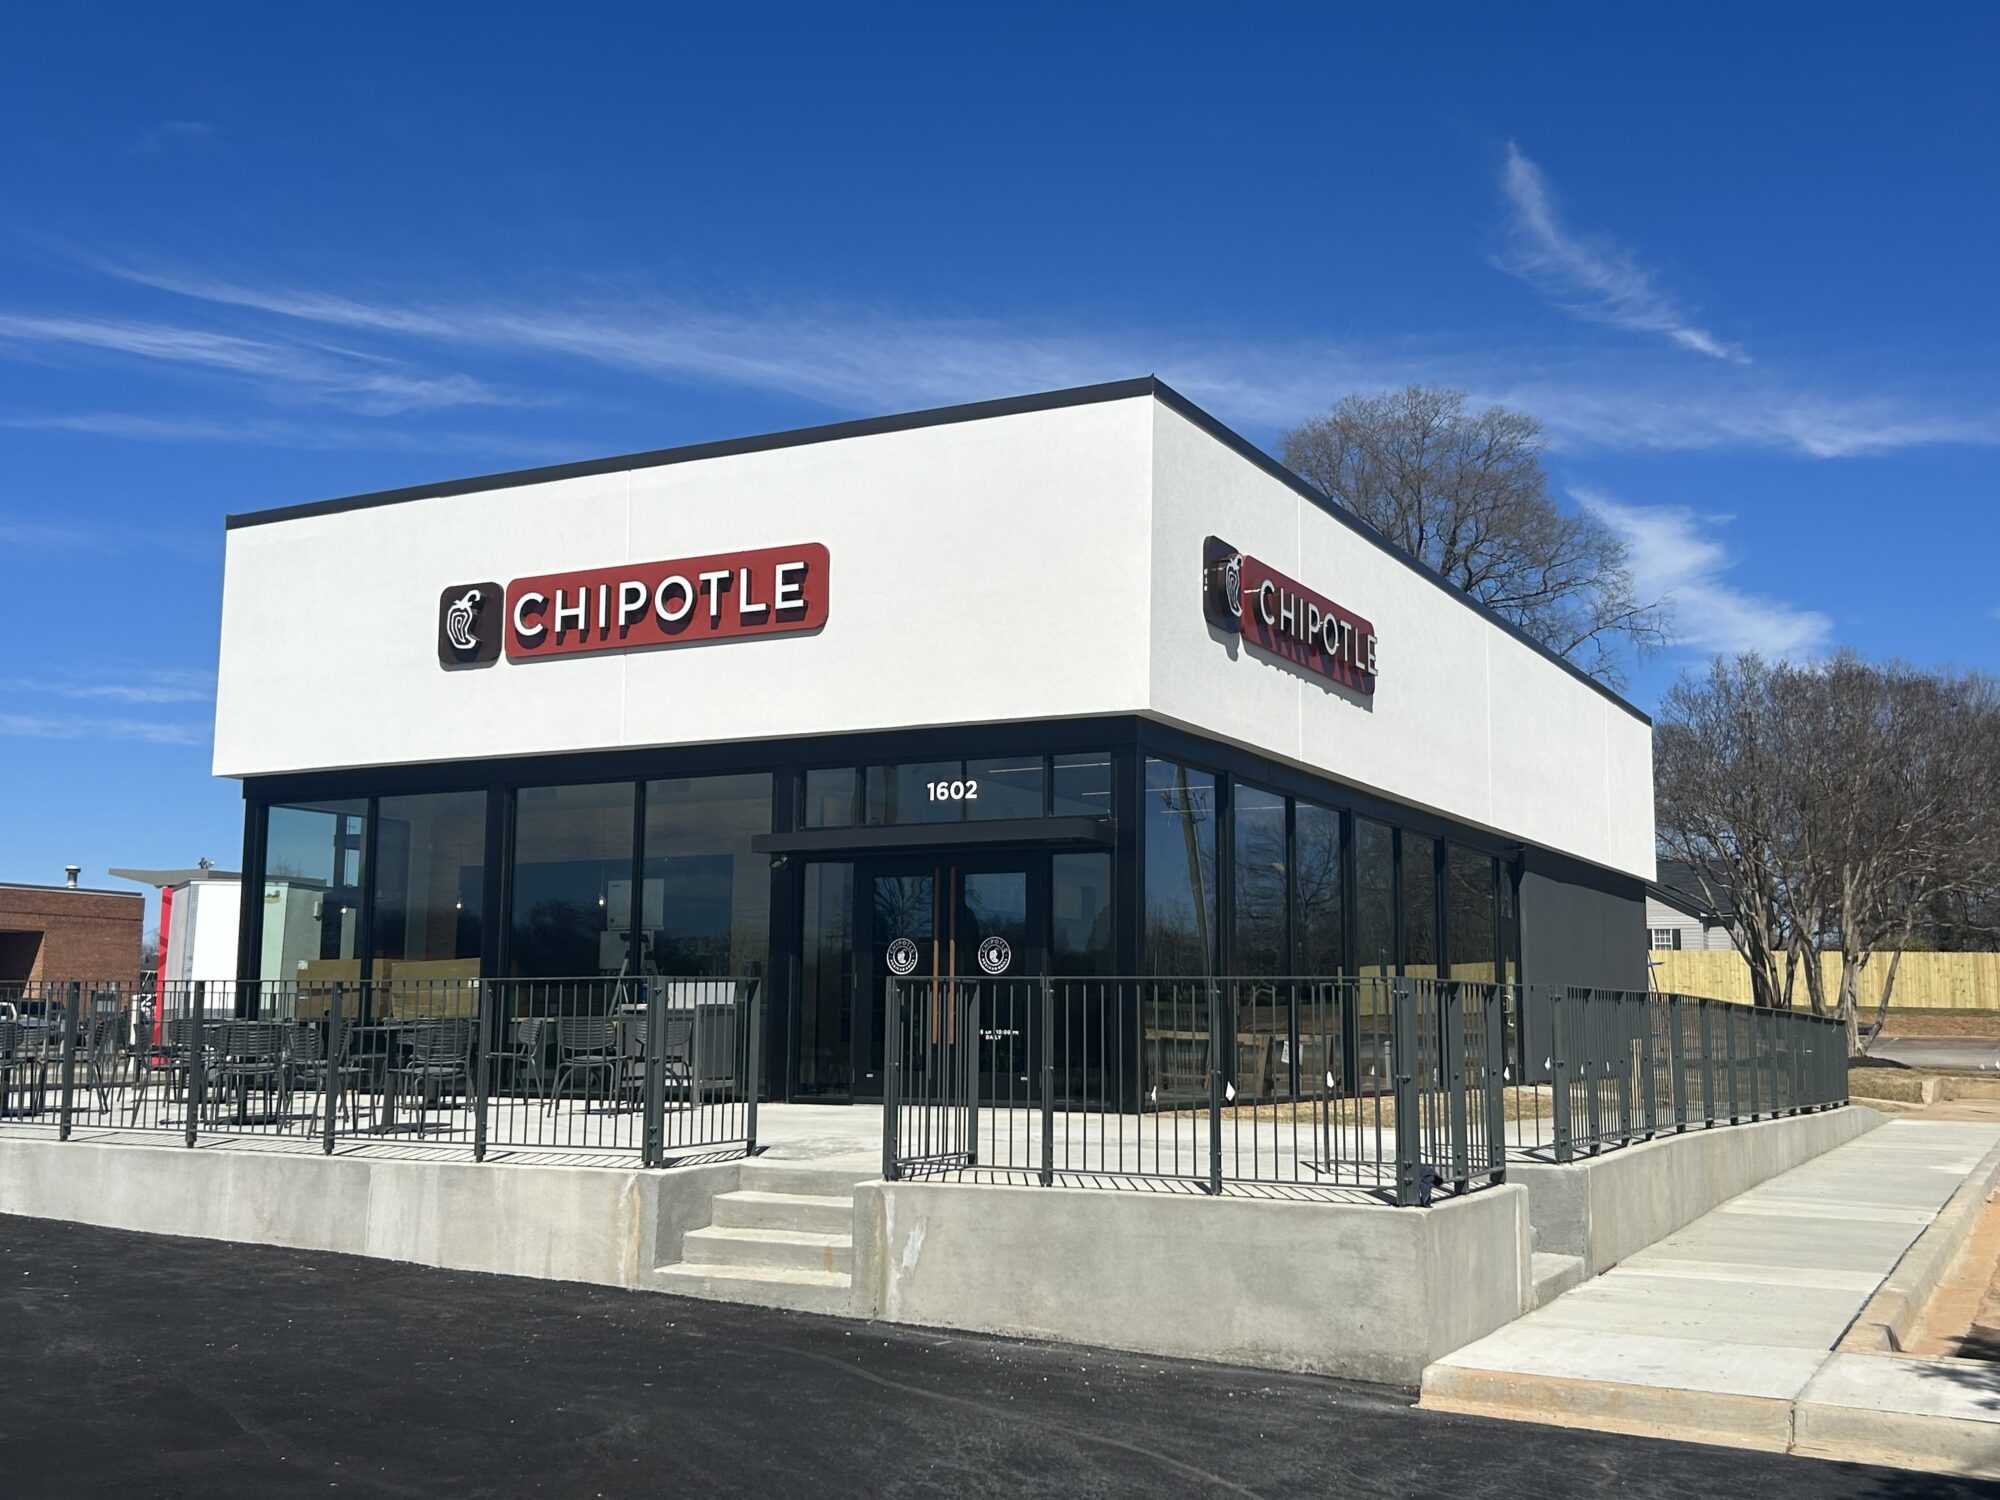 Chipotle is coming to Gaffney – Opening Soon